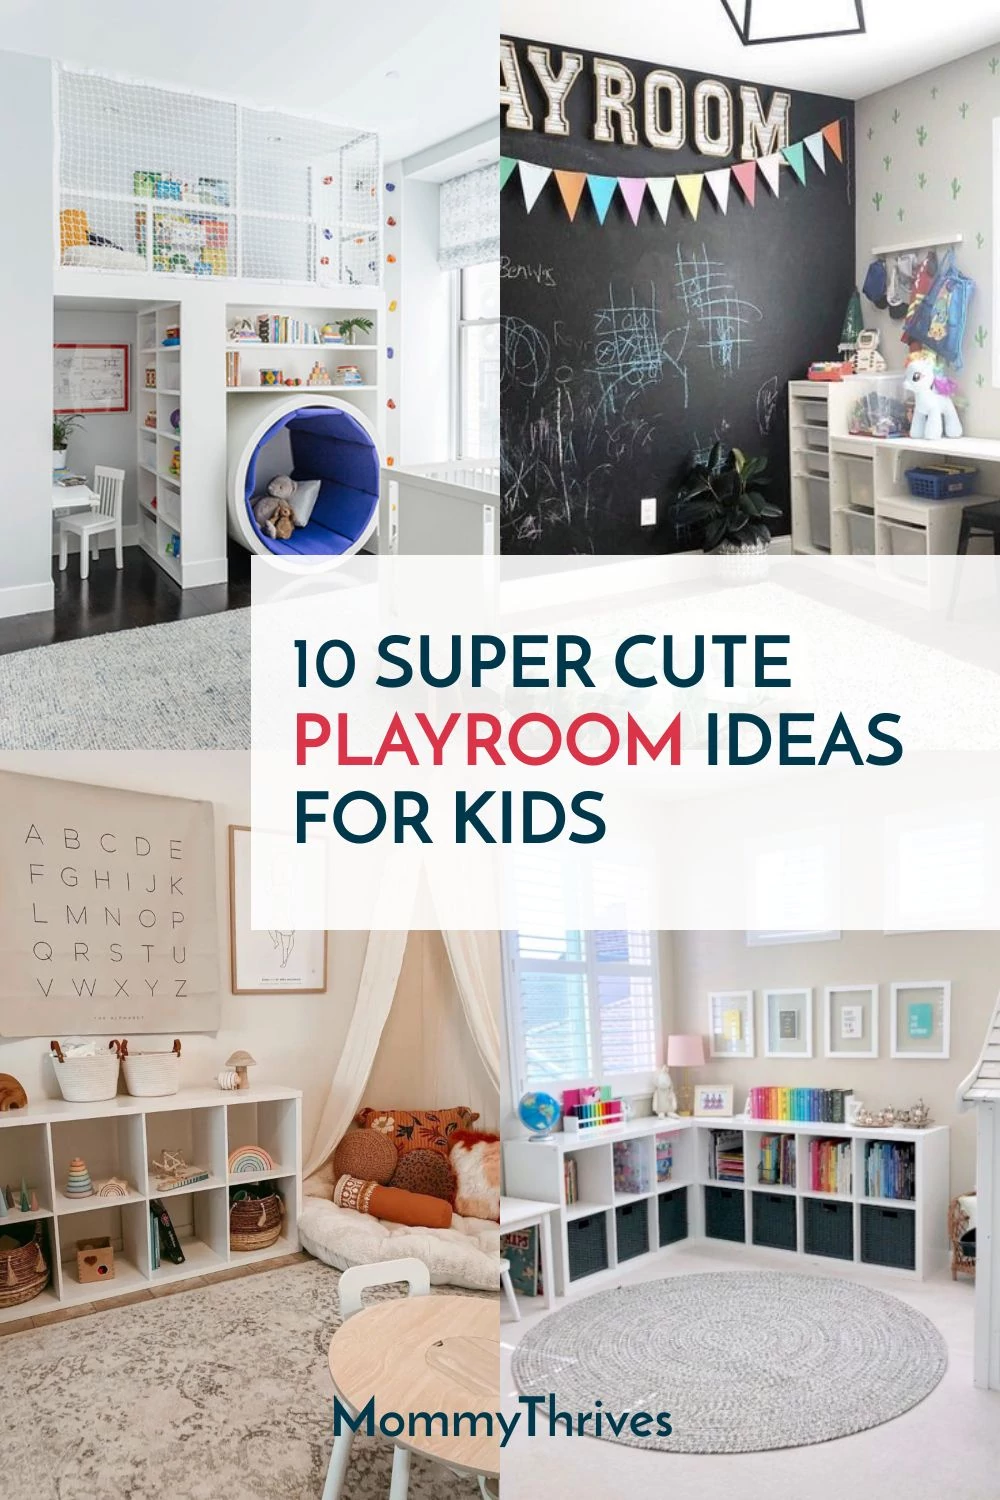 10 Super Cute Playroom Ideas For Kids - Small Space Play Room Ideas - Playroom Ideas For Bedroom, Basement, Living Room